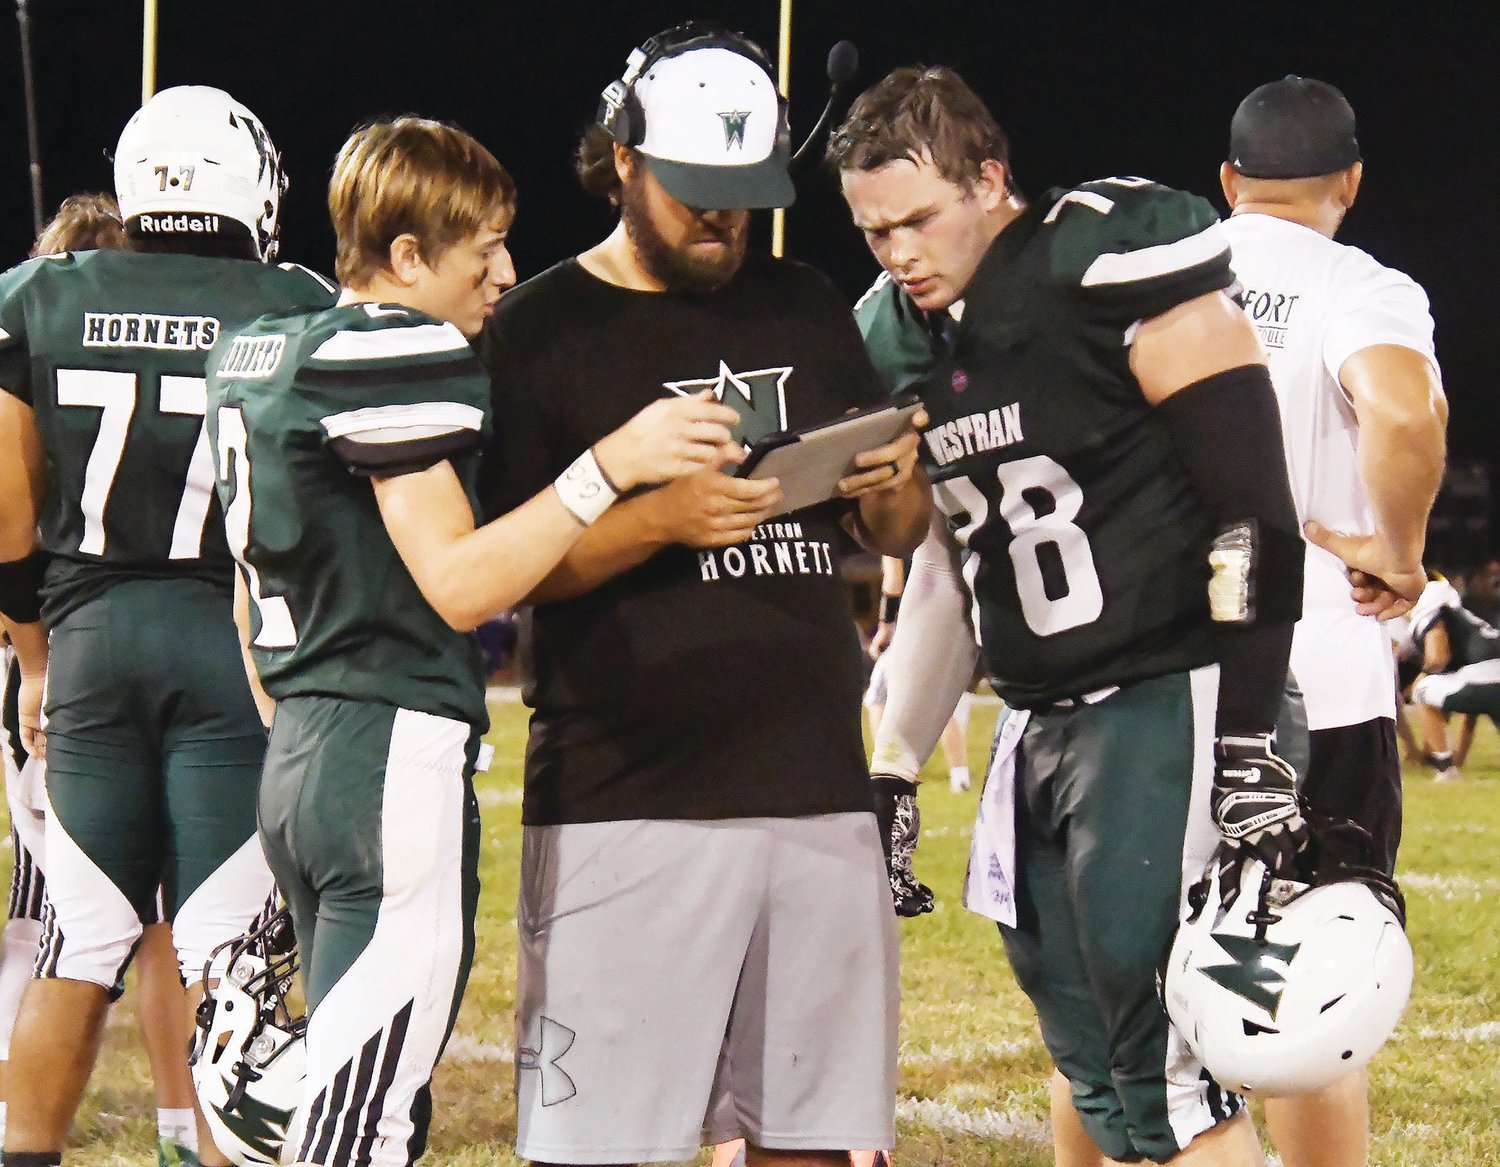 Westran football players Nate Kribbs (2) and Brenin Howell (78) cover assignments with assistant coach Jordan Saah, a first-year coach who most recently served in the same capacity in Louisiana.